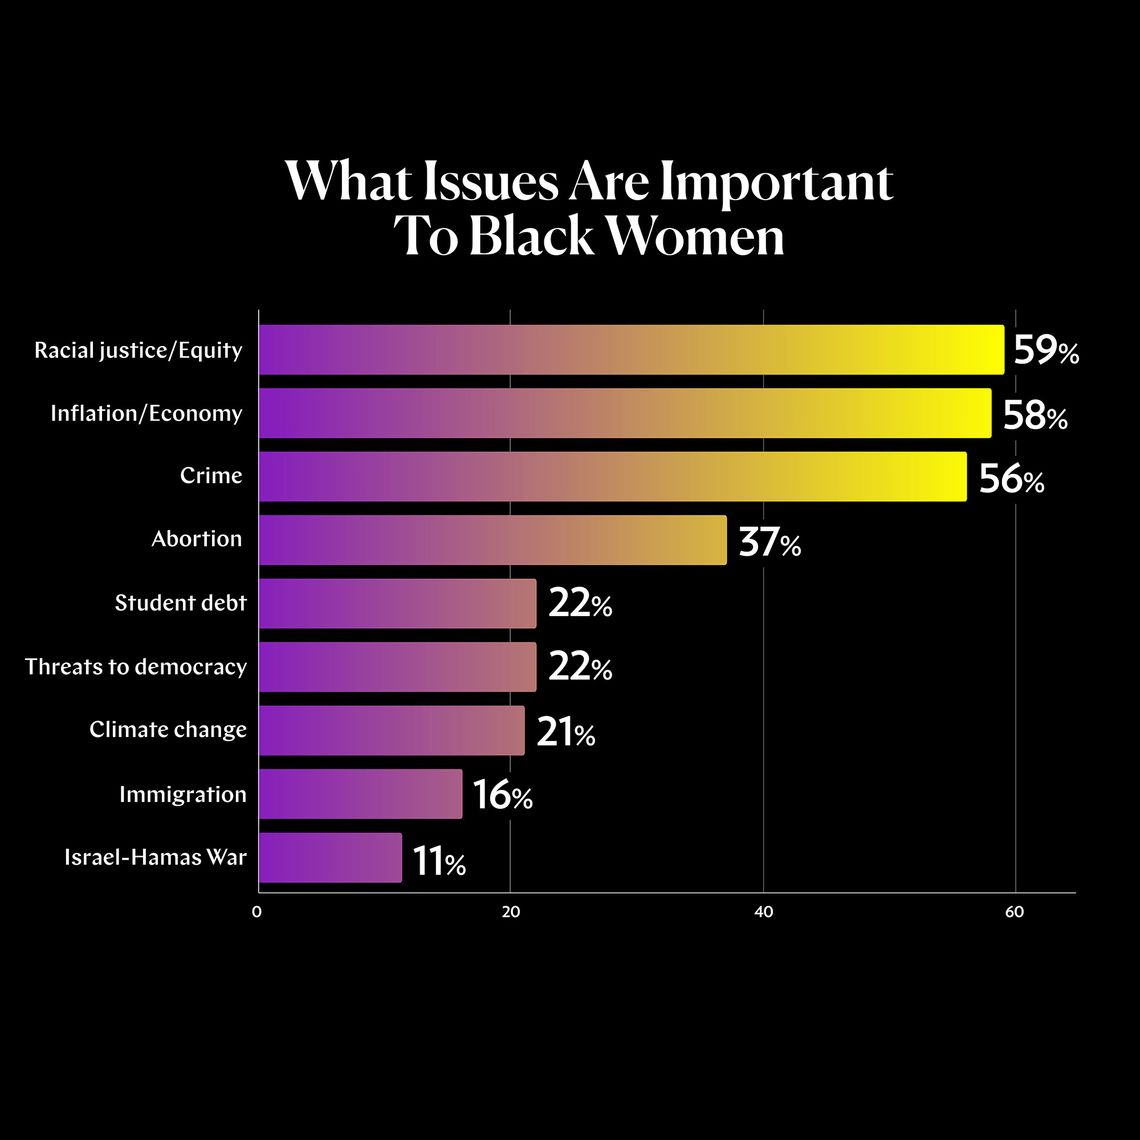 A bar chart showing how important various issues rank to black women voters.